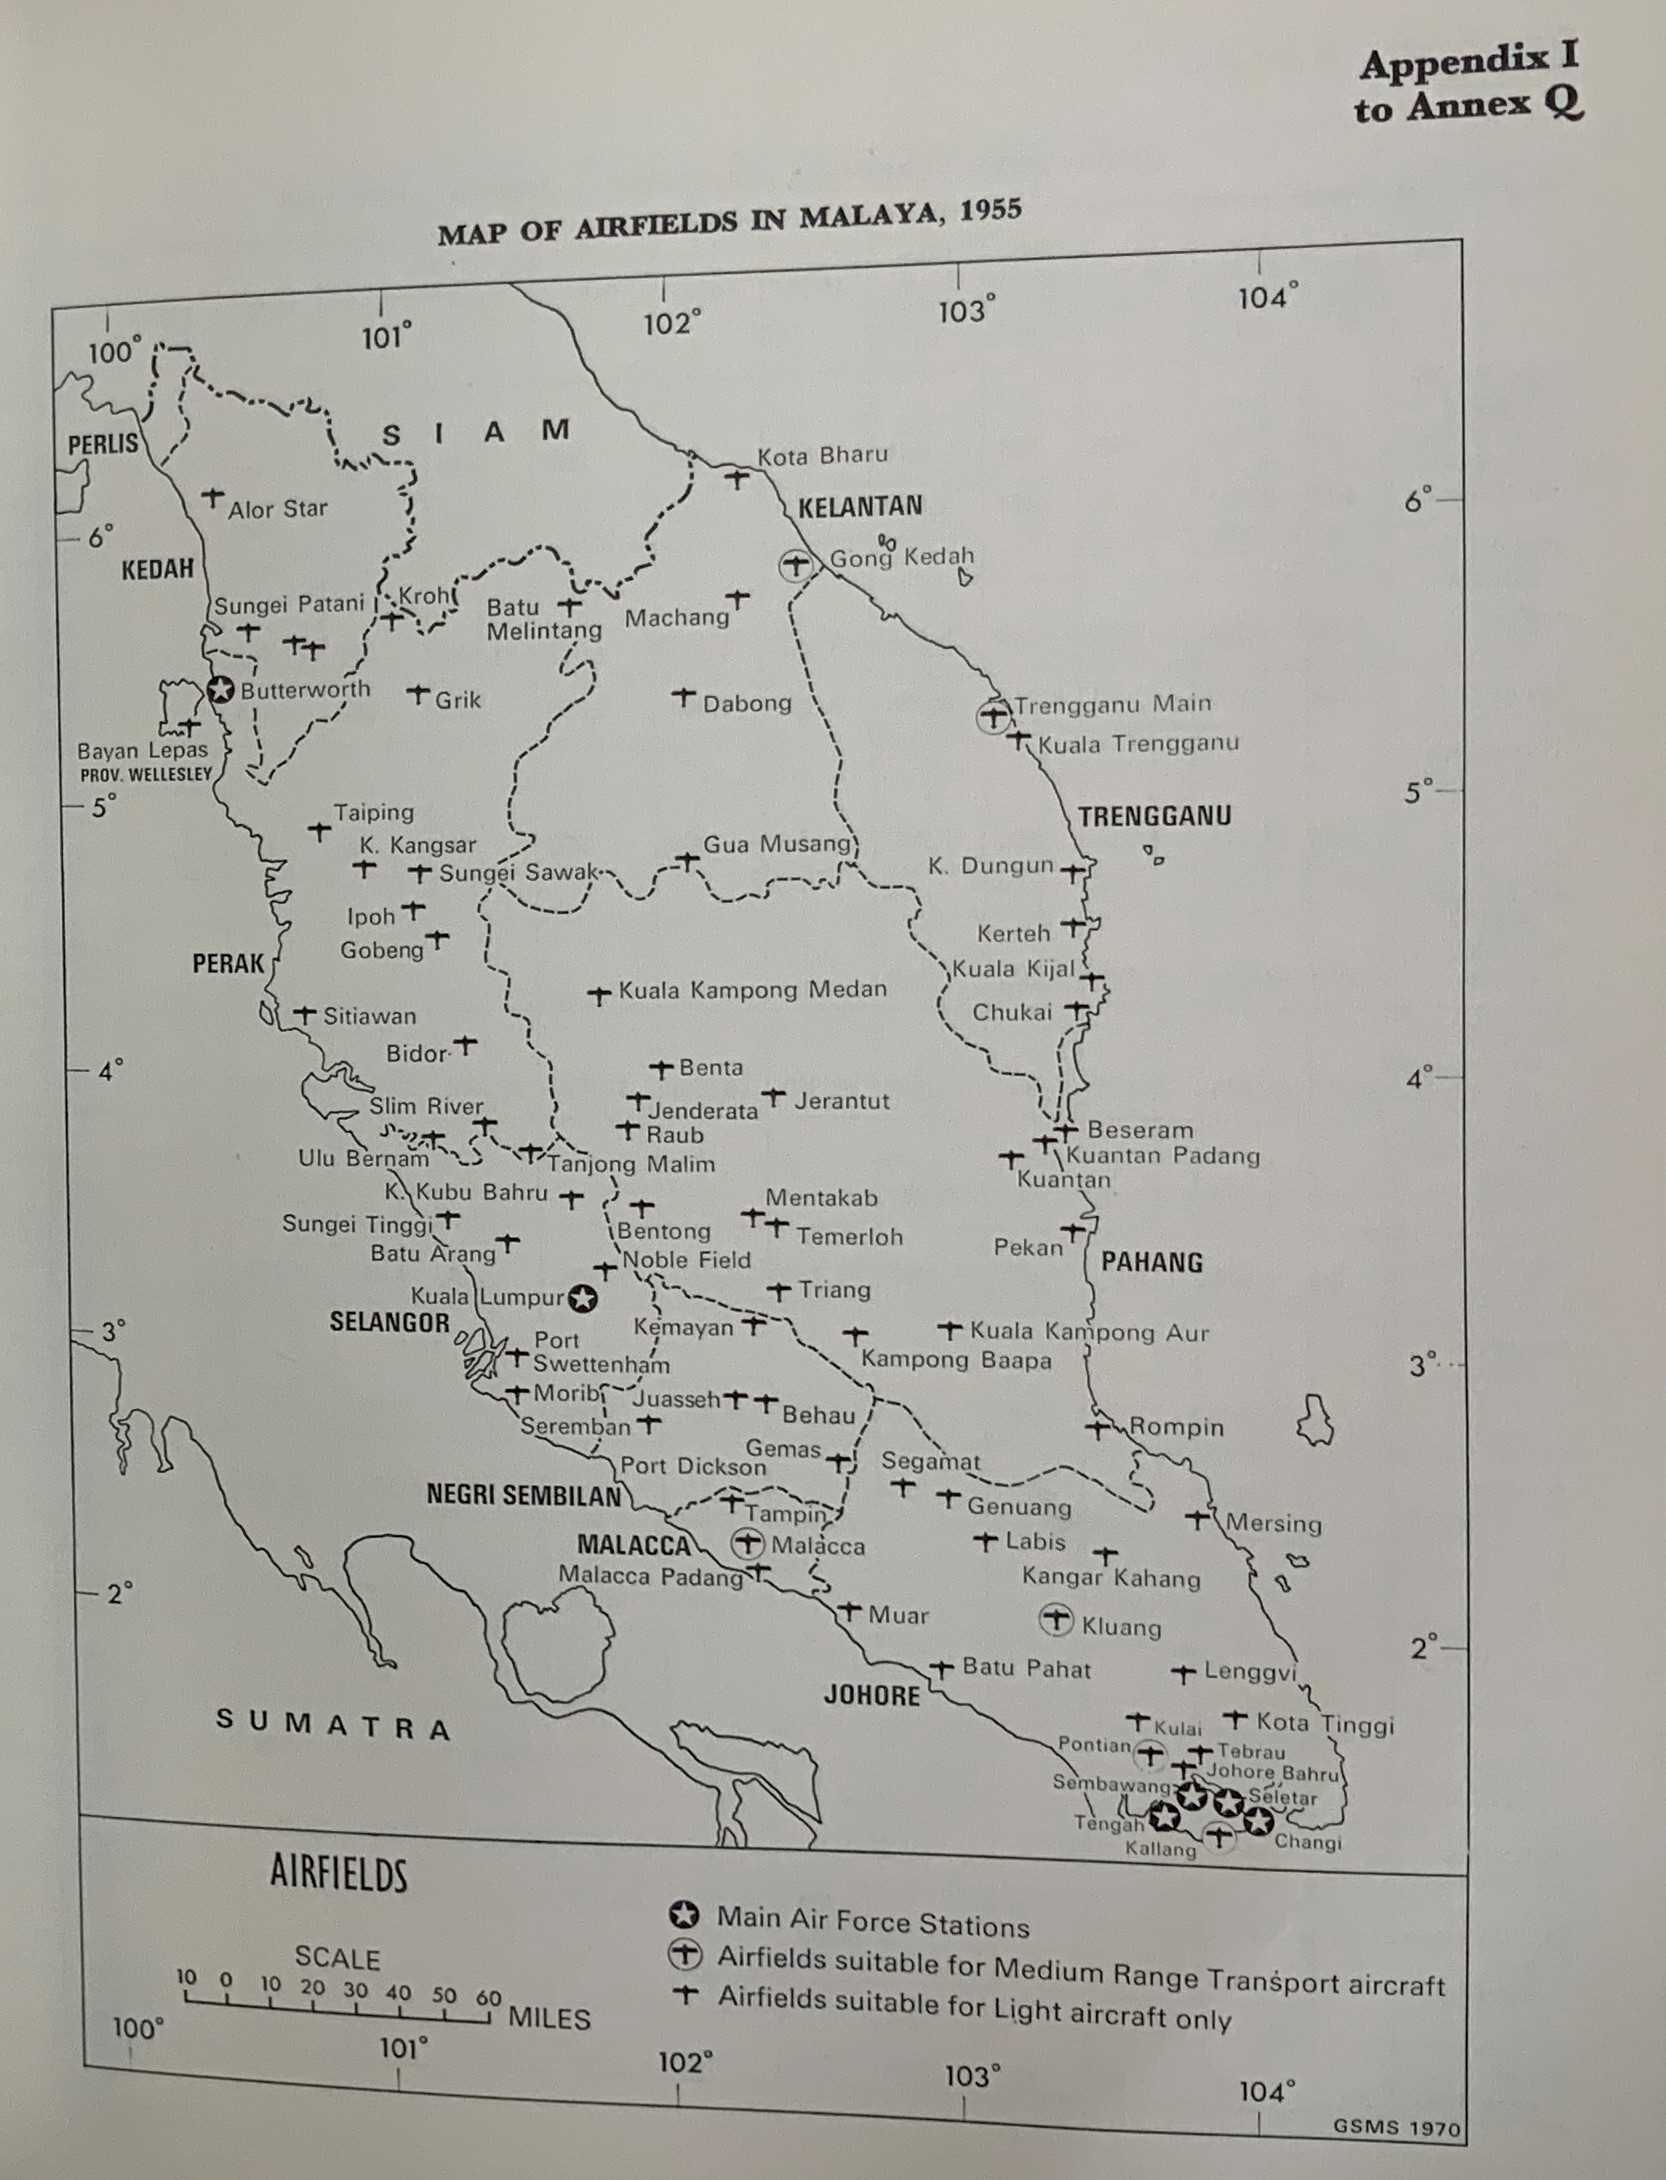 Map of airfields in Malaya 1955